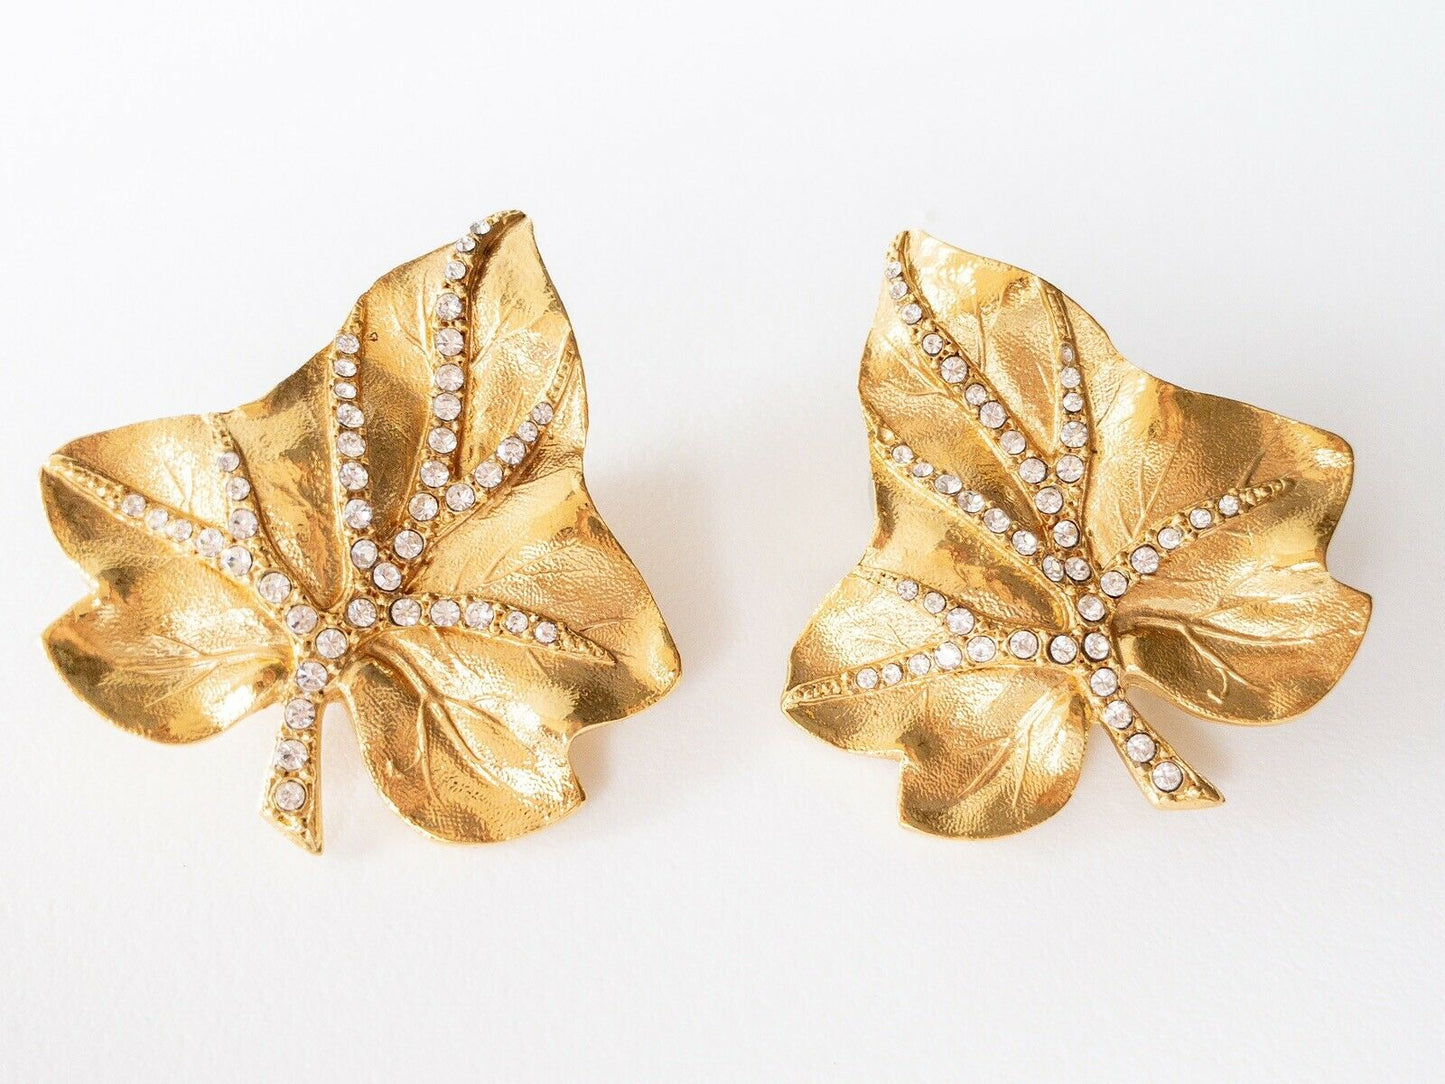 【SOLD OUT】Jacques Fath Gold Tone Leaf Earrings Made in France Vintage